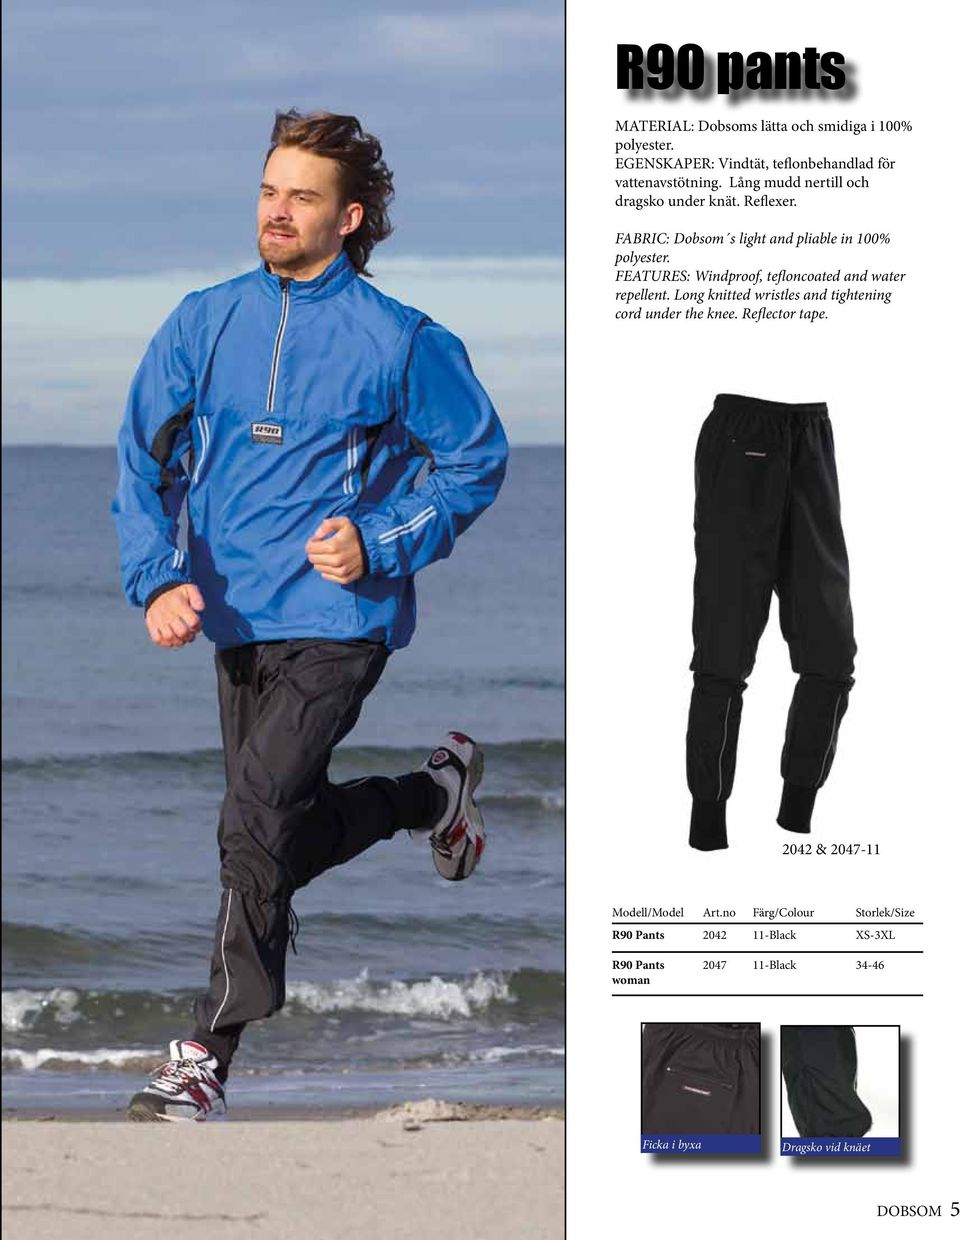 FABRIC: Dobsom s light and pliable in 100% polyester. FEATURES: Windproof, tefloncoated and water repellent.